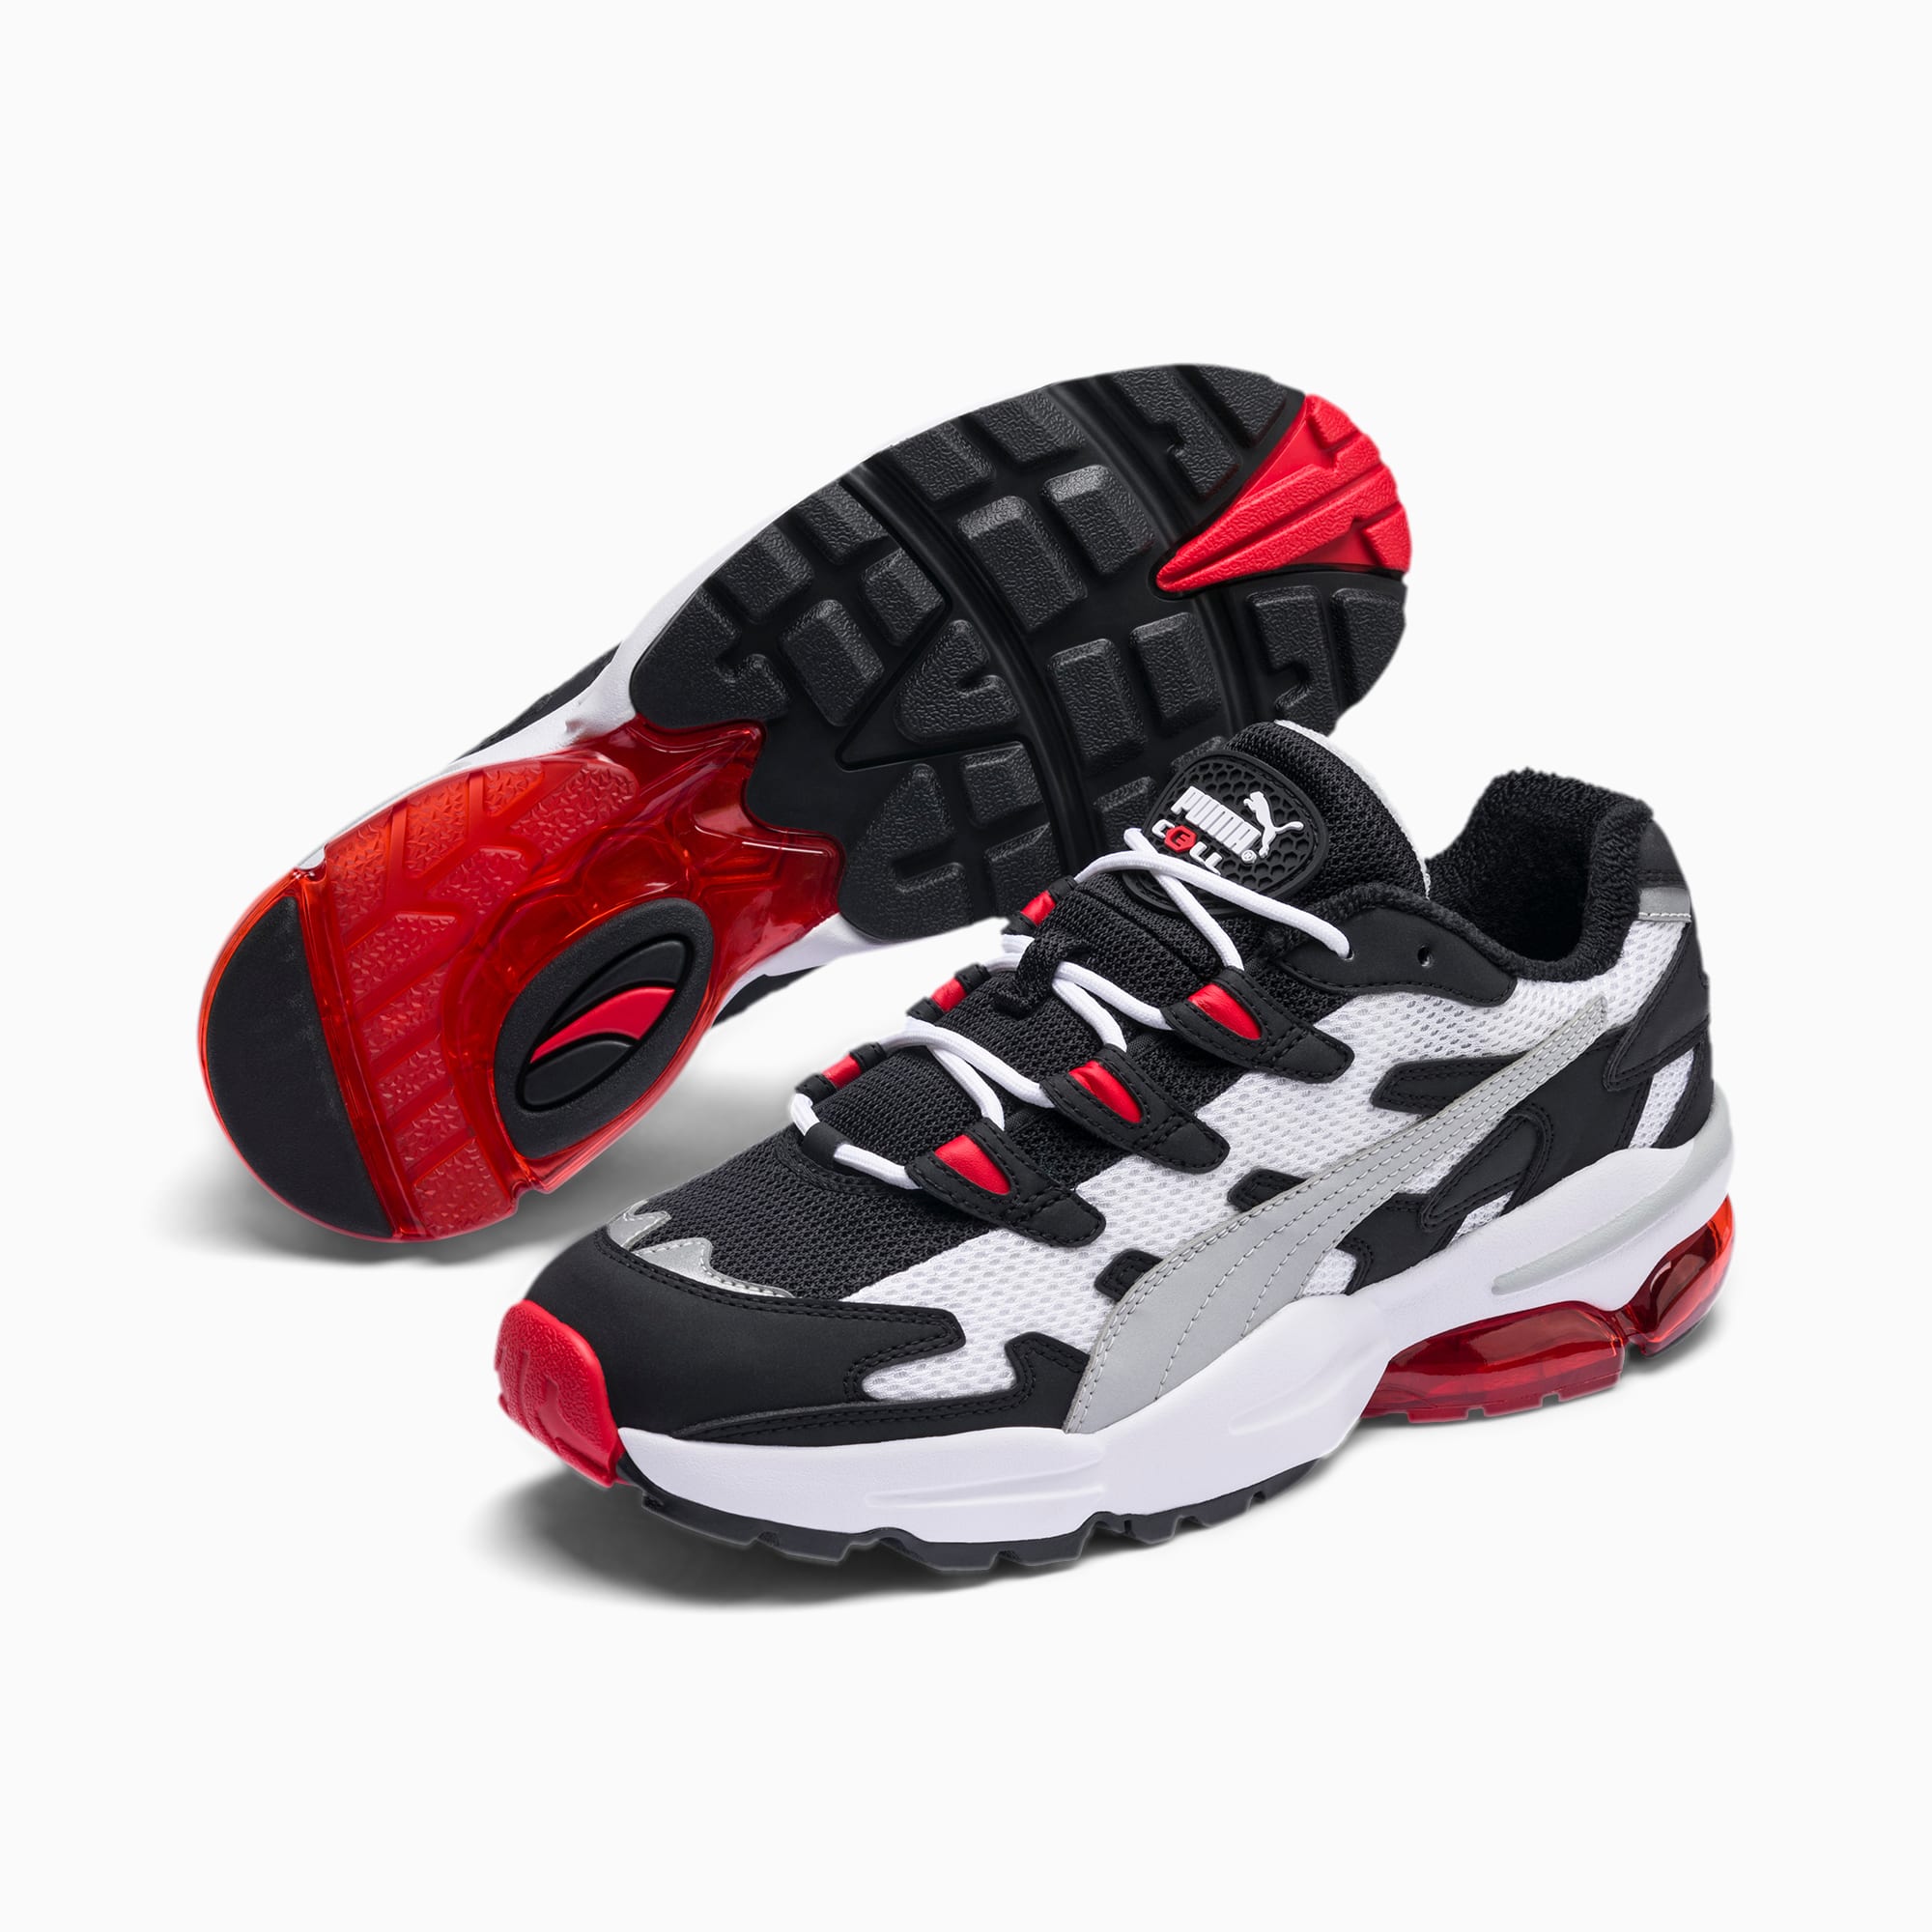 puma cell alien red